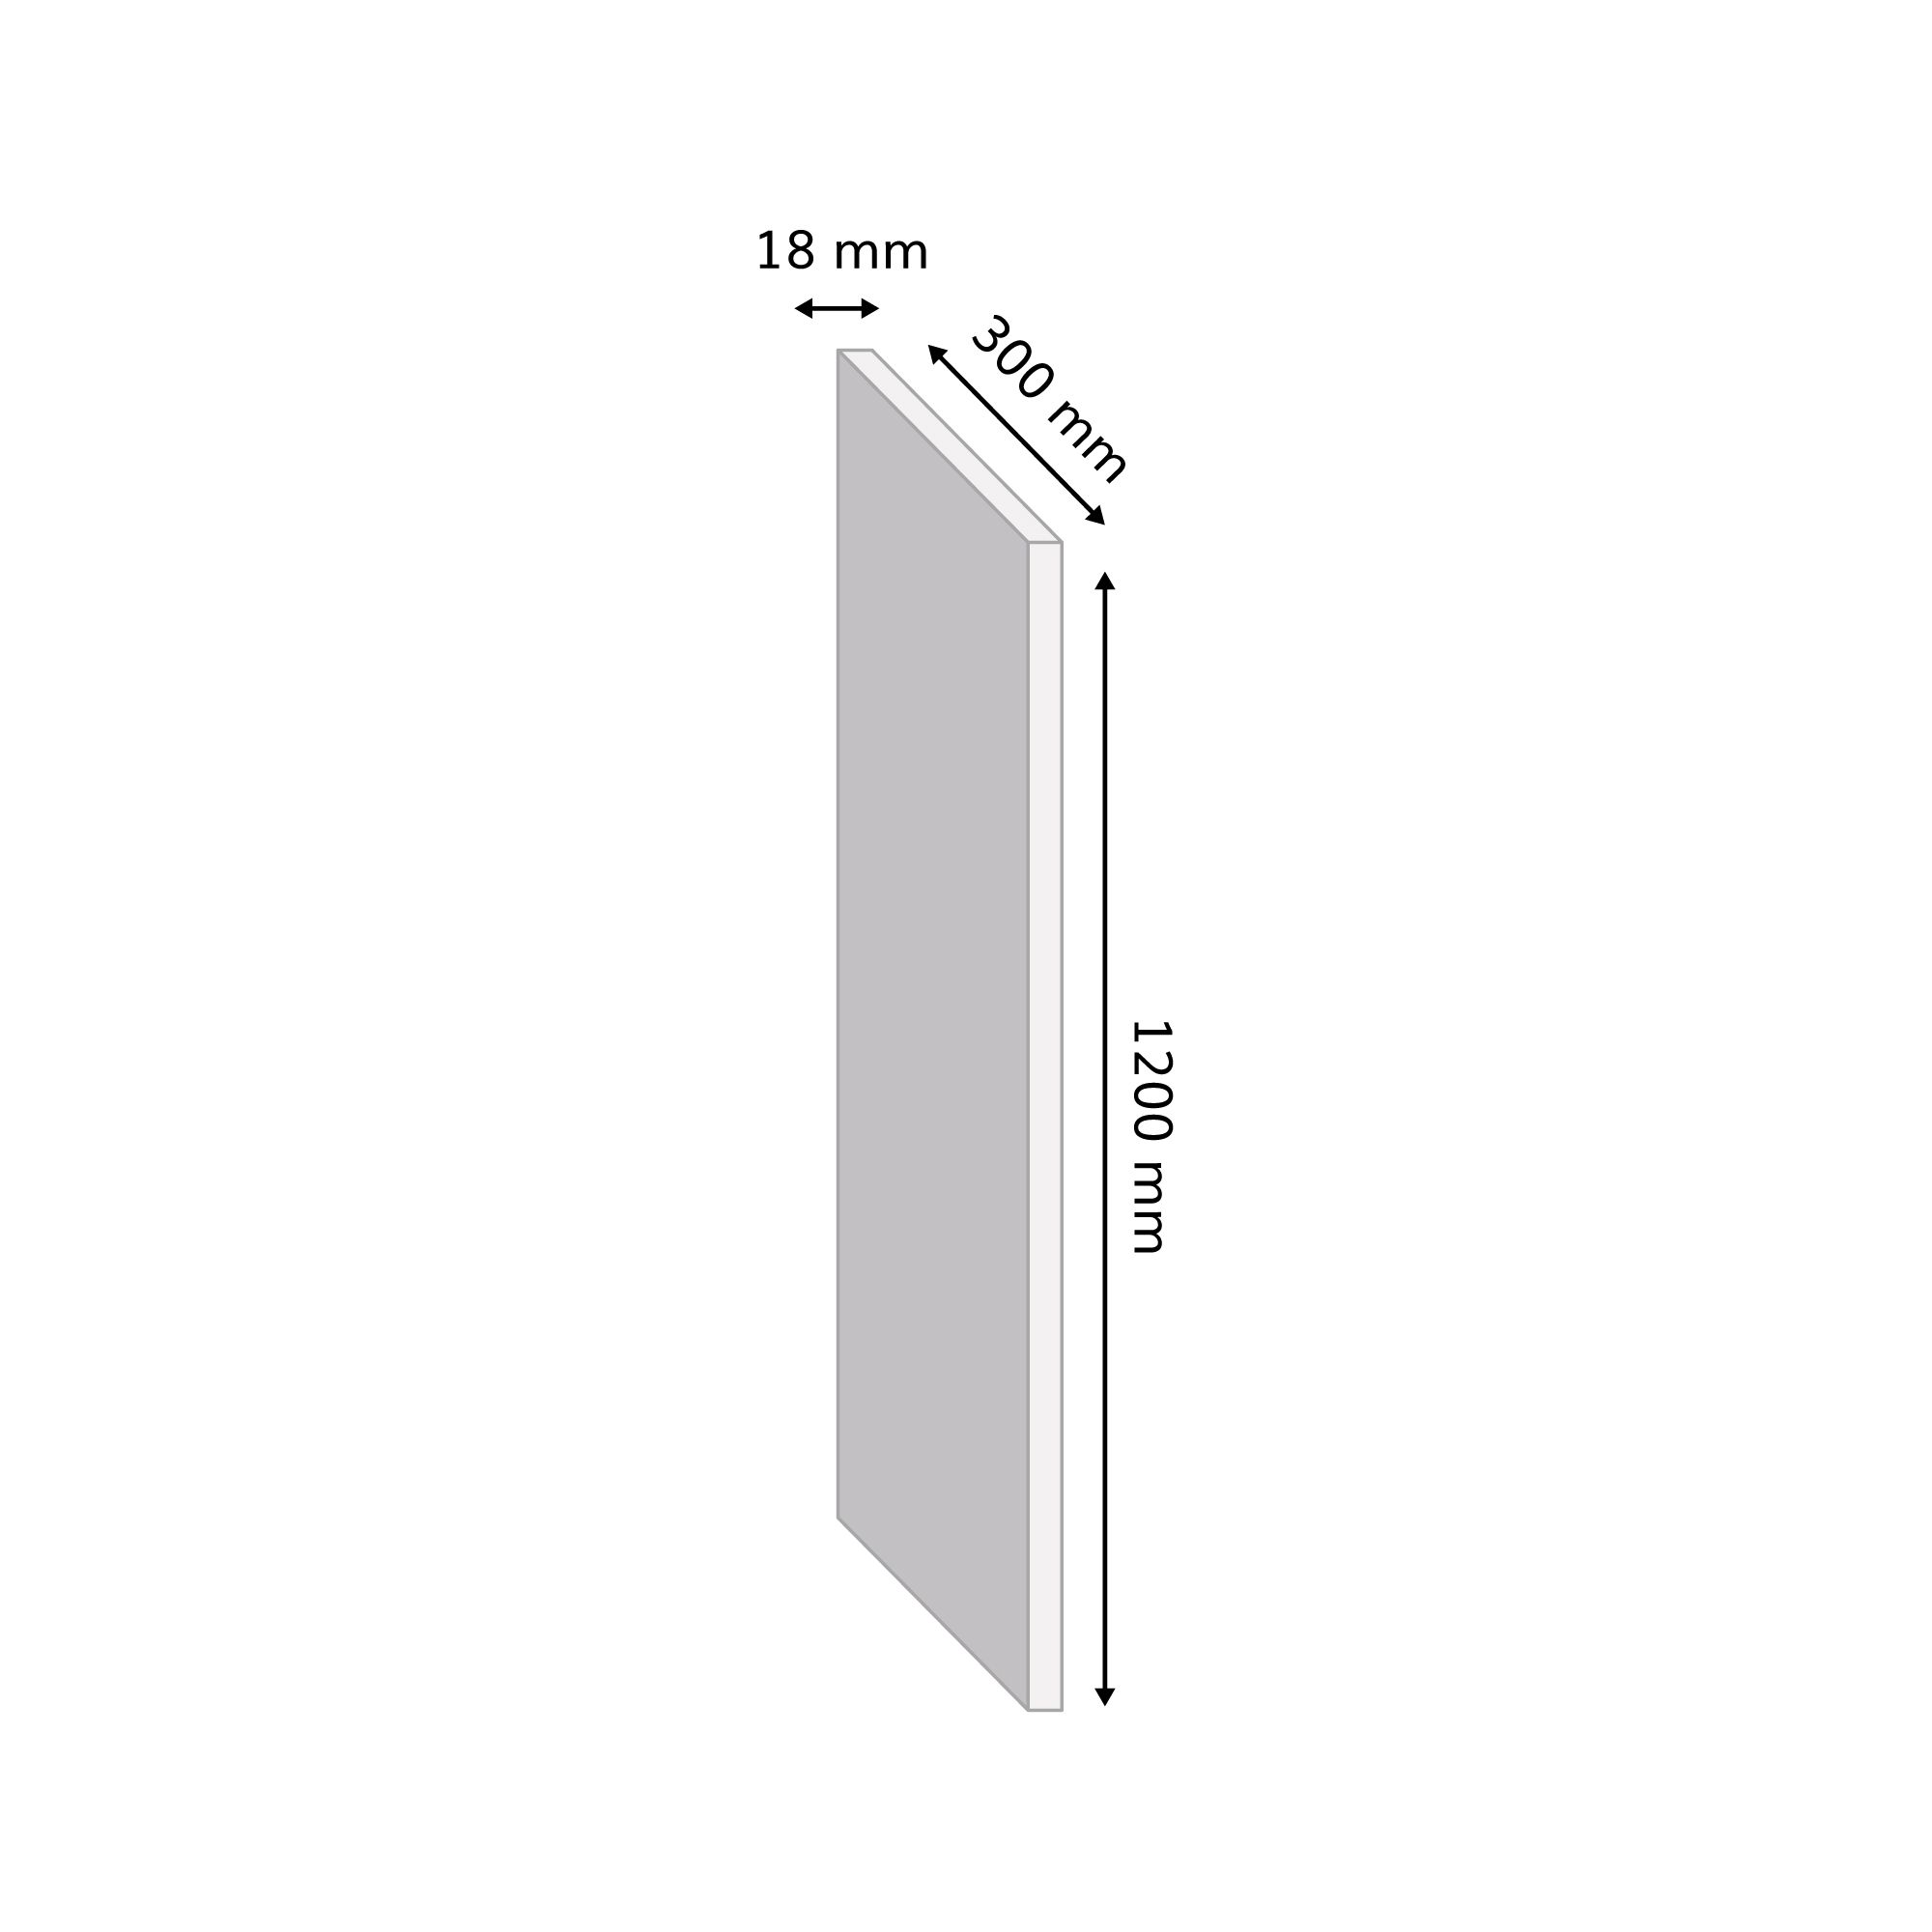 White Gloss Fully edged Furniture panel, (L)1.2m (W)300mm (T)18mm